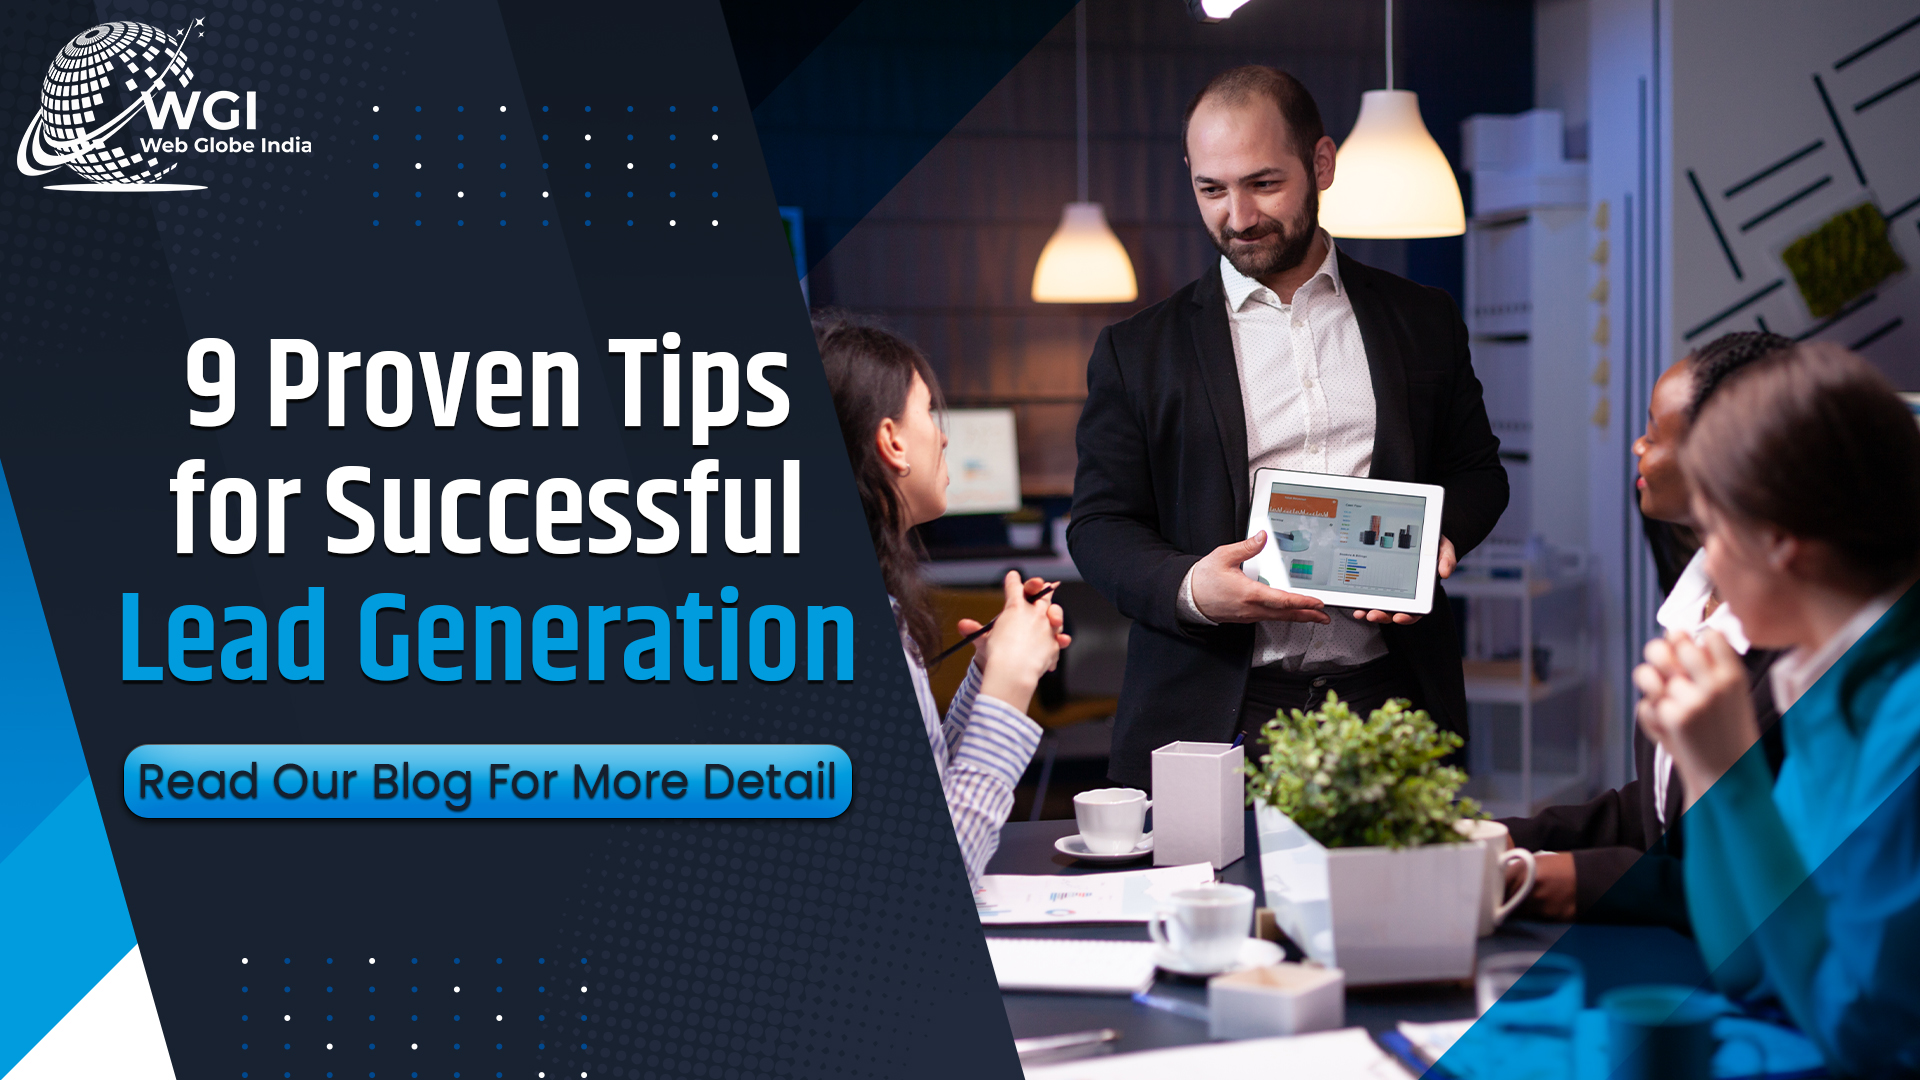 9 Proven Tips for Successful Lead Generation